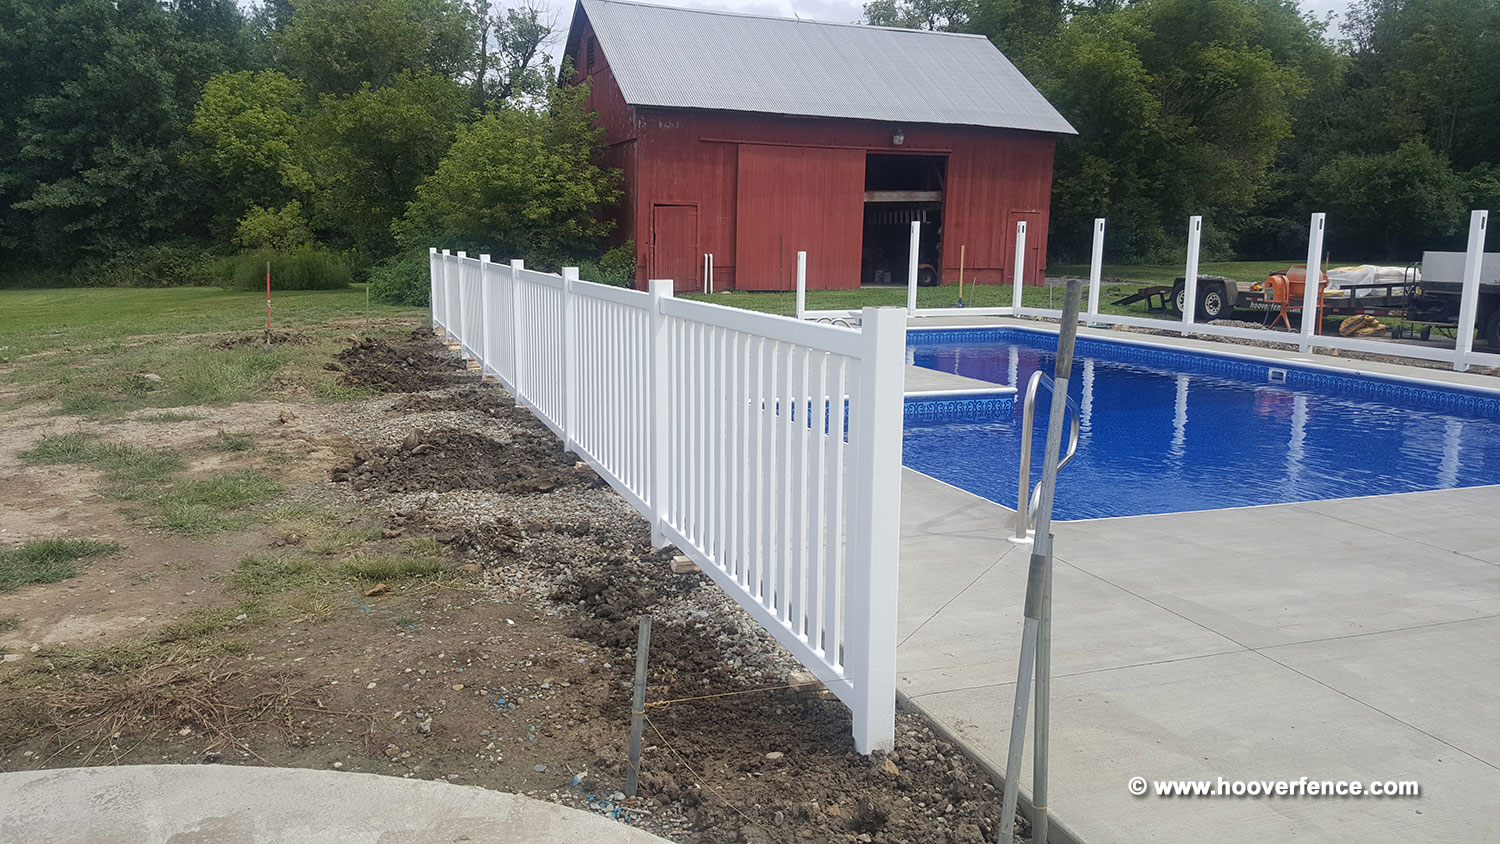 Chesterfield and Baron Vinyl Fence Installation by Hoover Fence Co - Southington, OH